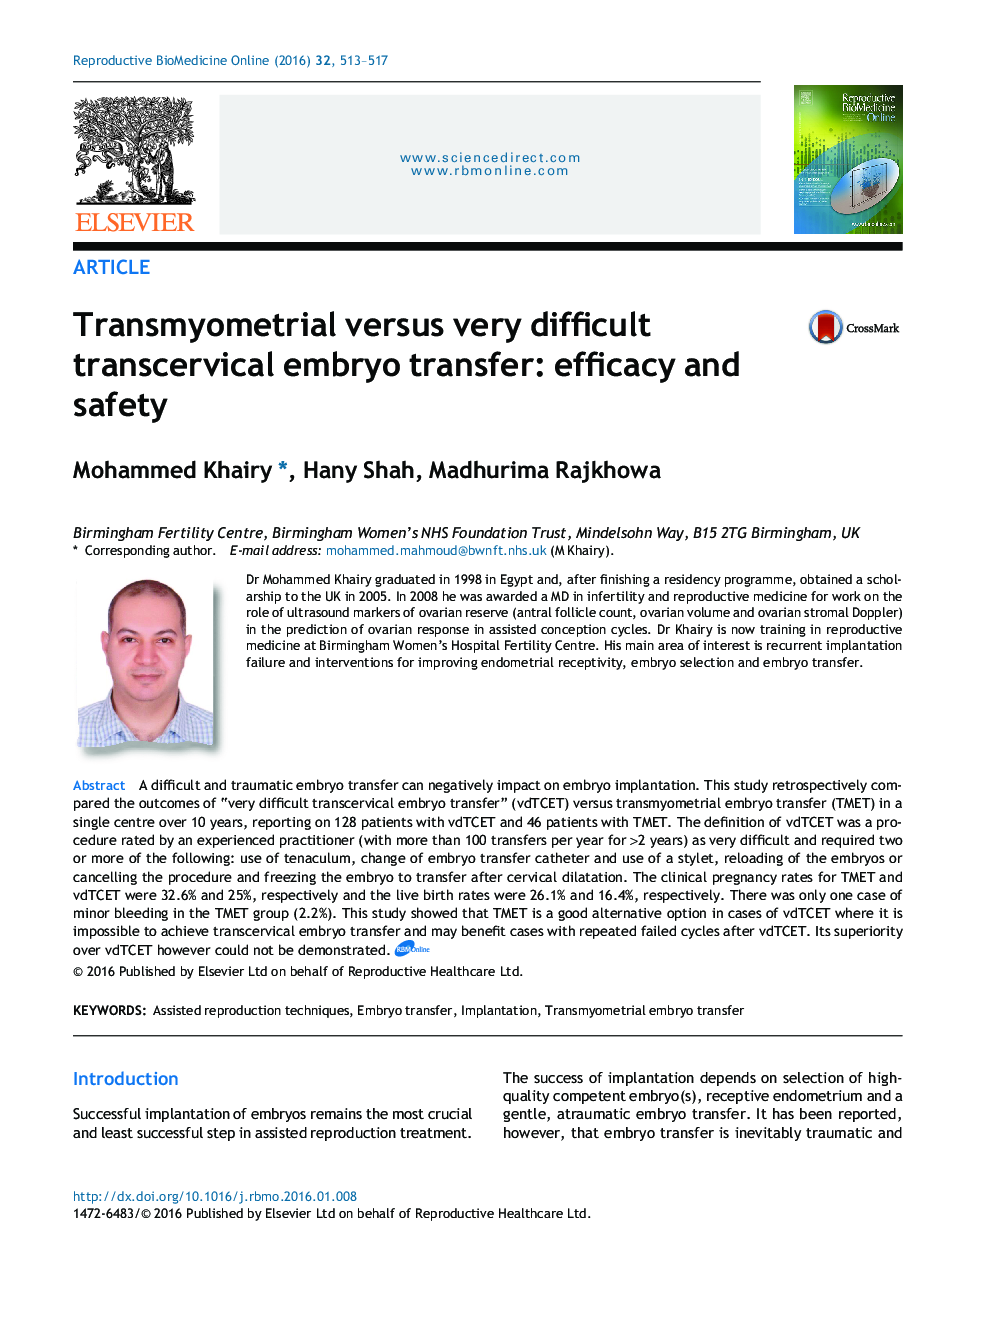 Transmyometrial versus very difficult transcervical embryo transfer: efficacy and safety